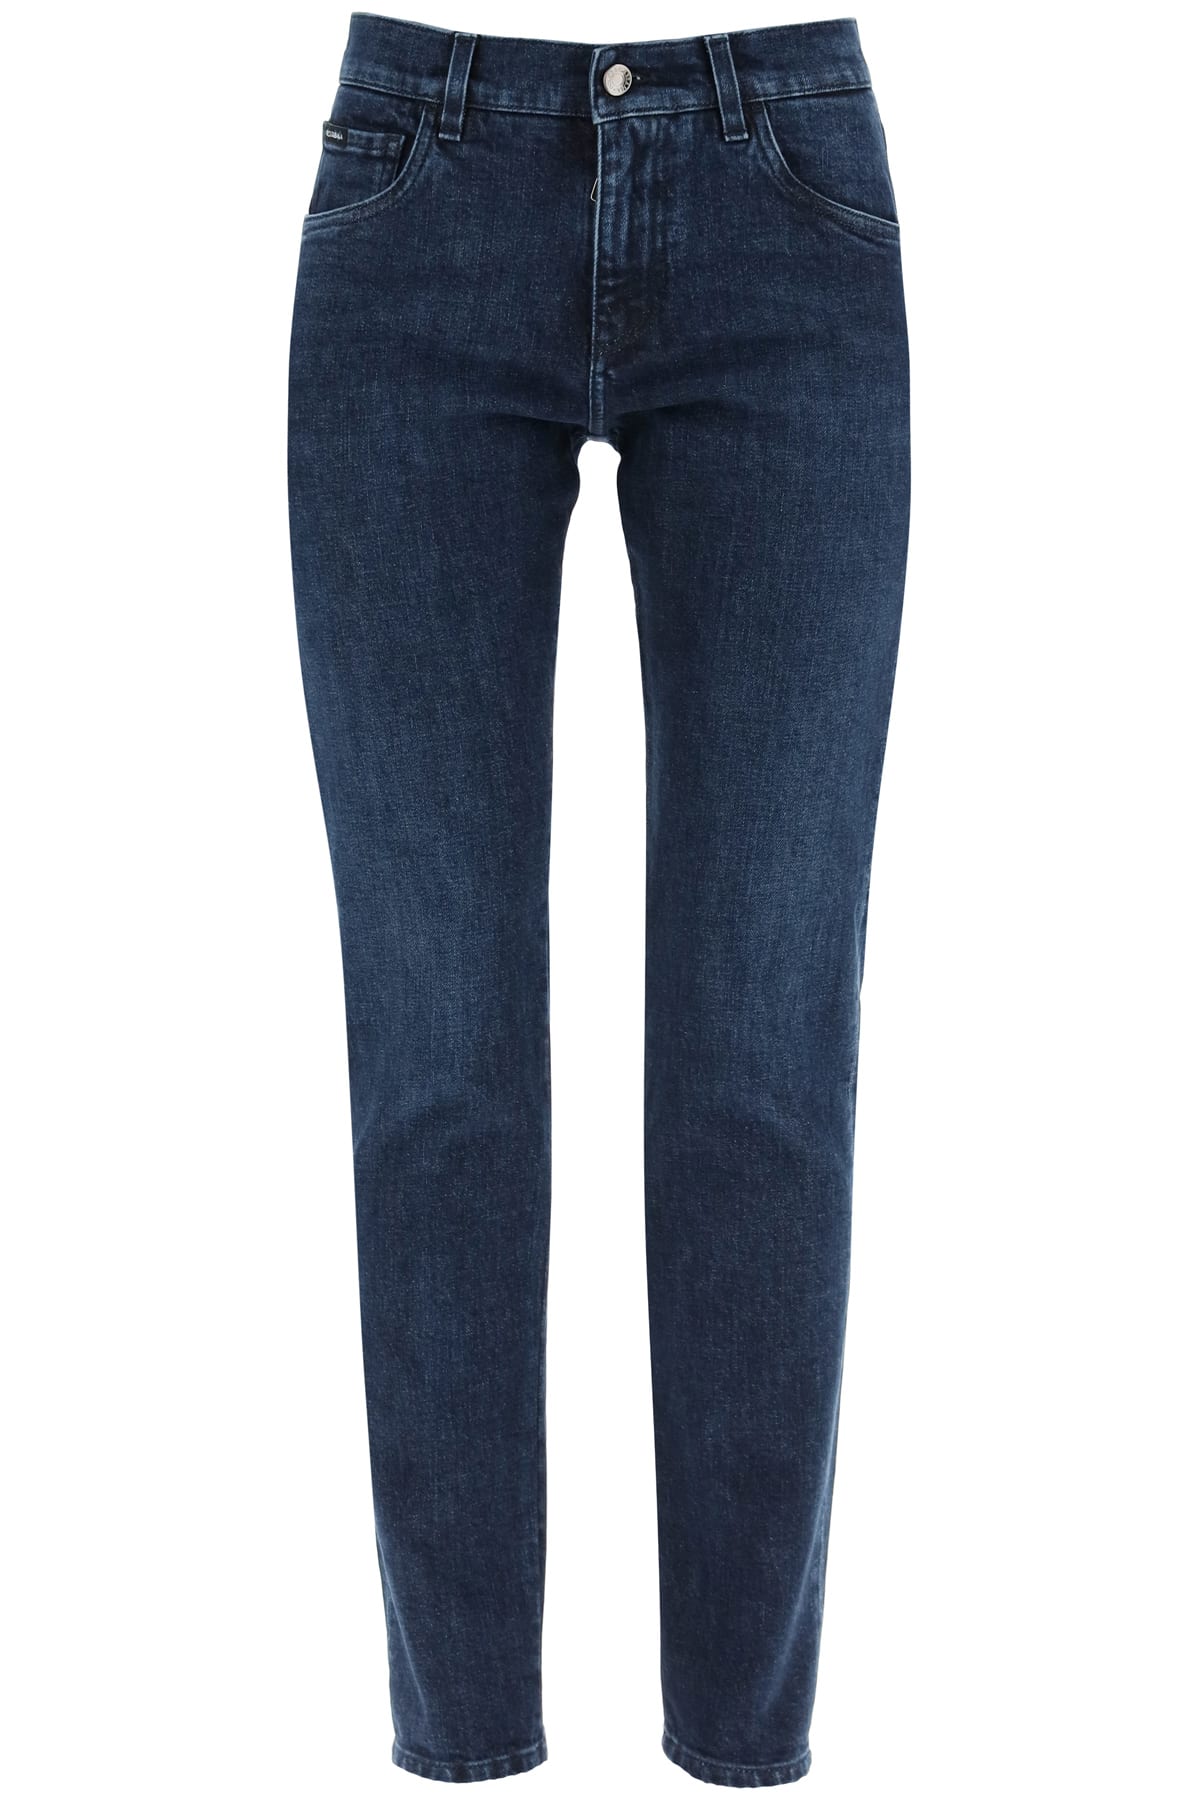 Dolce & Gabbana Slim Jeans With Leopard Lined Pockets